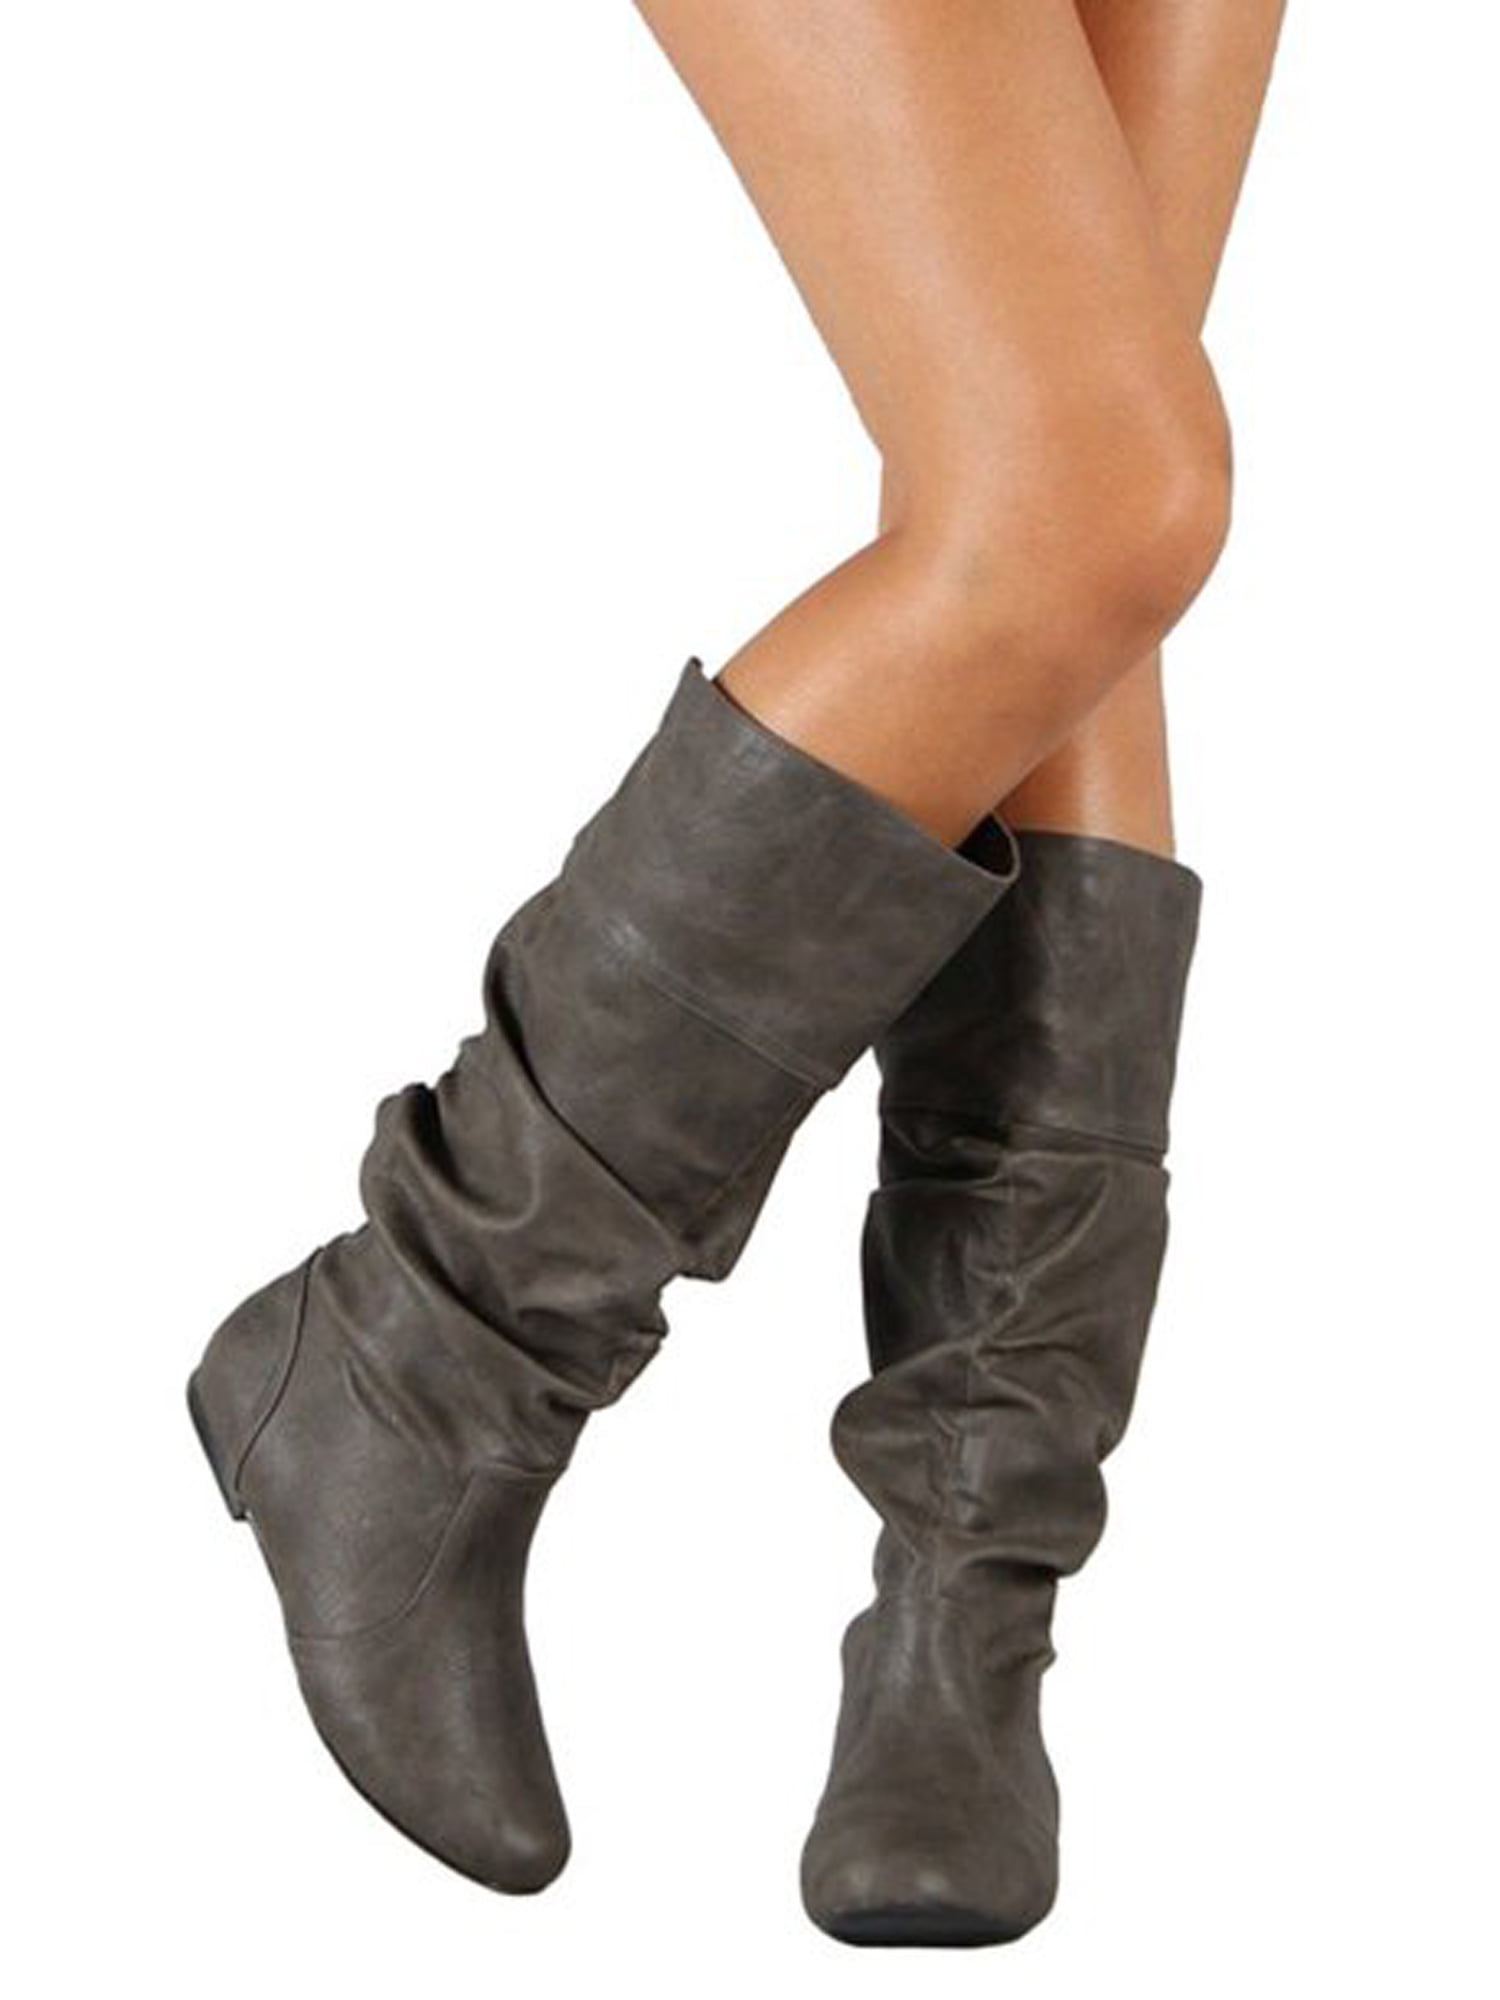 WOMENS LADIES FLAT KNEE HIGH QUILTED BUCKLE RIDING CALF WINTER BOOTS SIZE 